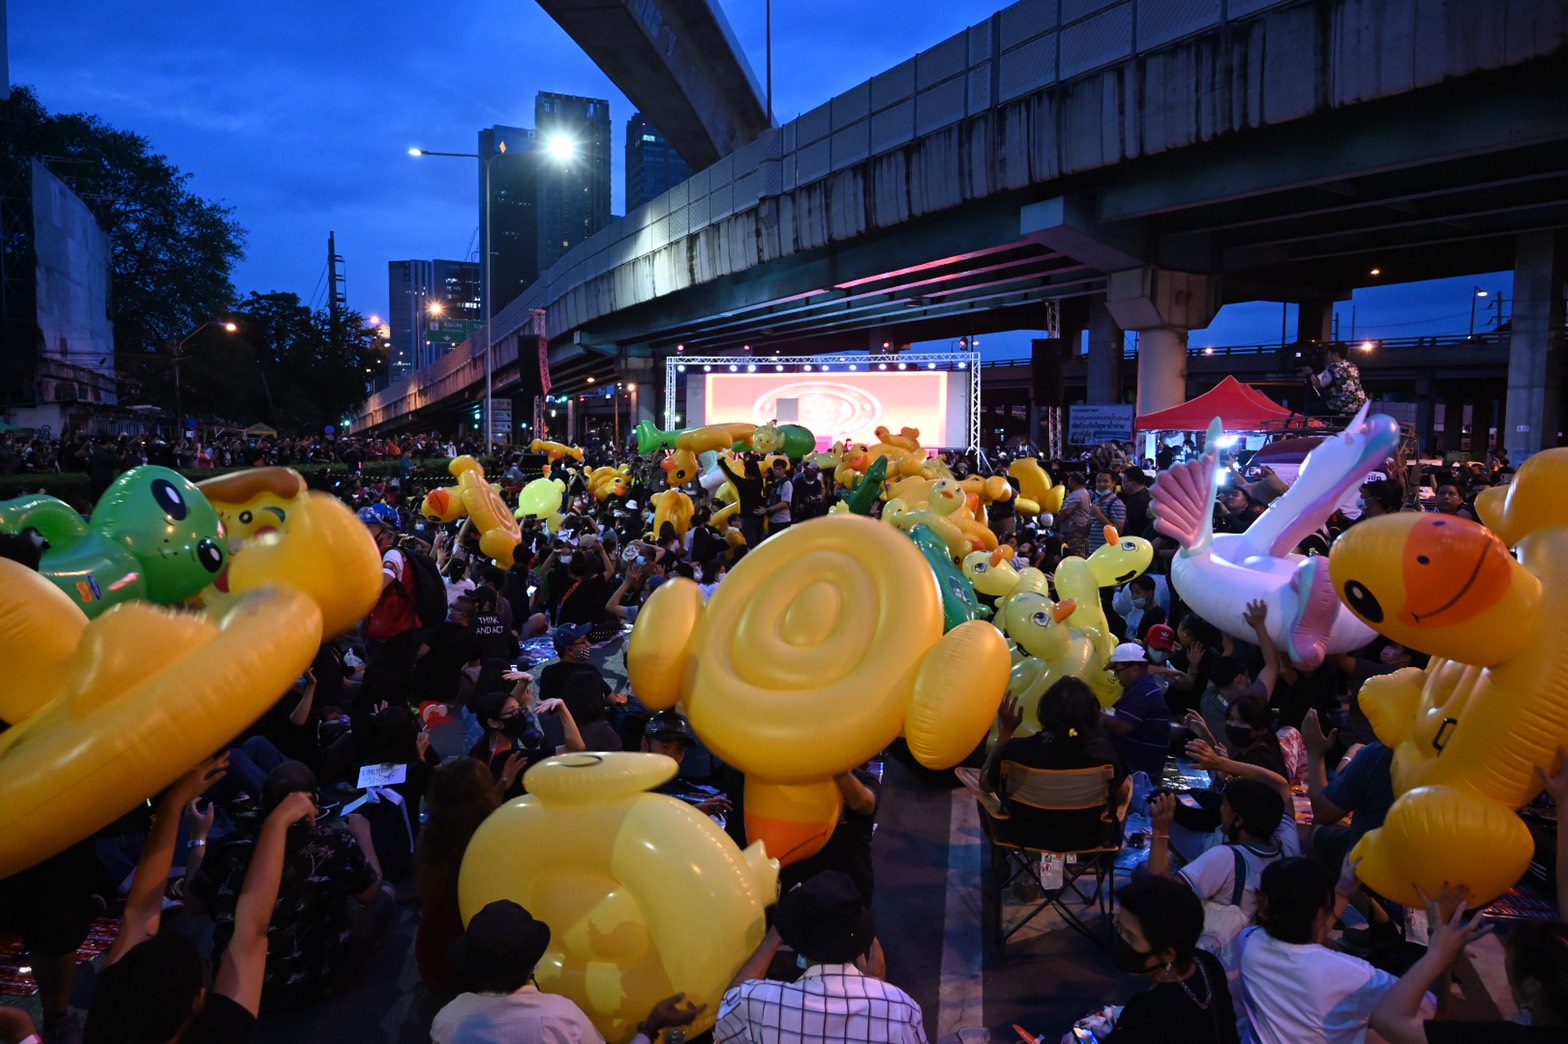 Rubber ducks being passed to the main stage during the protest on Dec. 2, 2020.